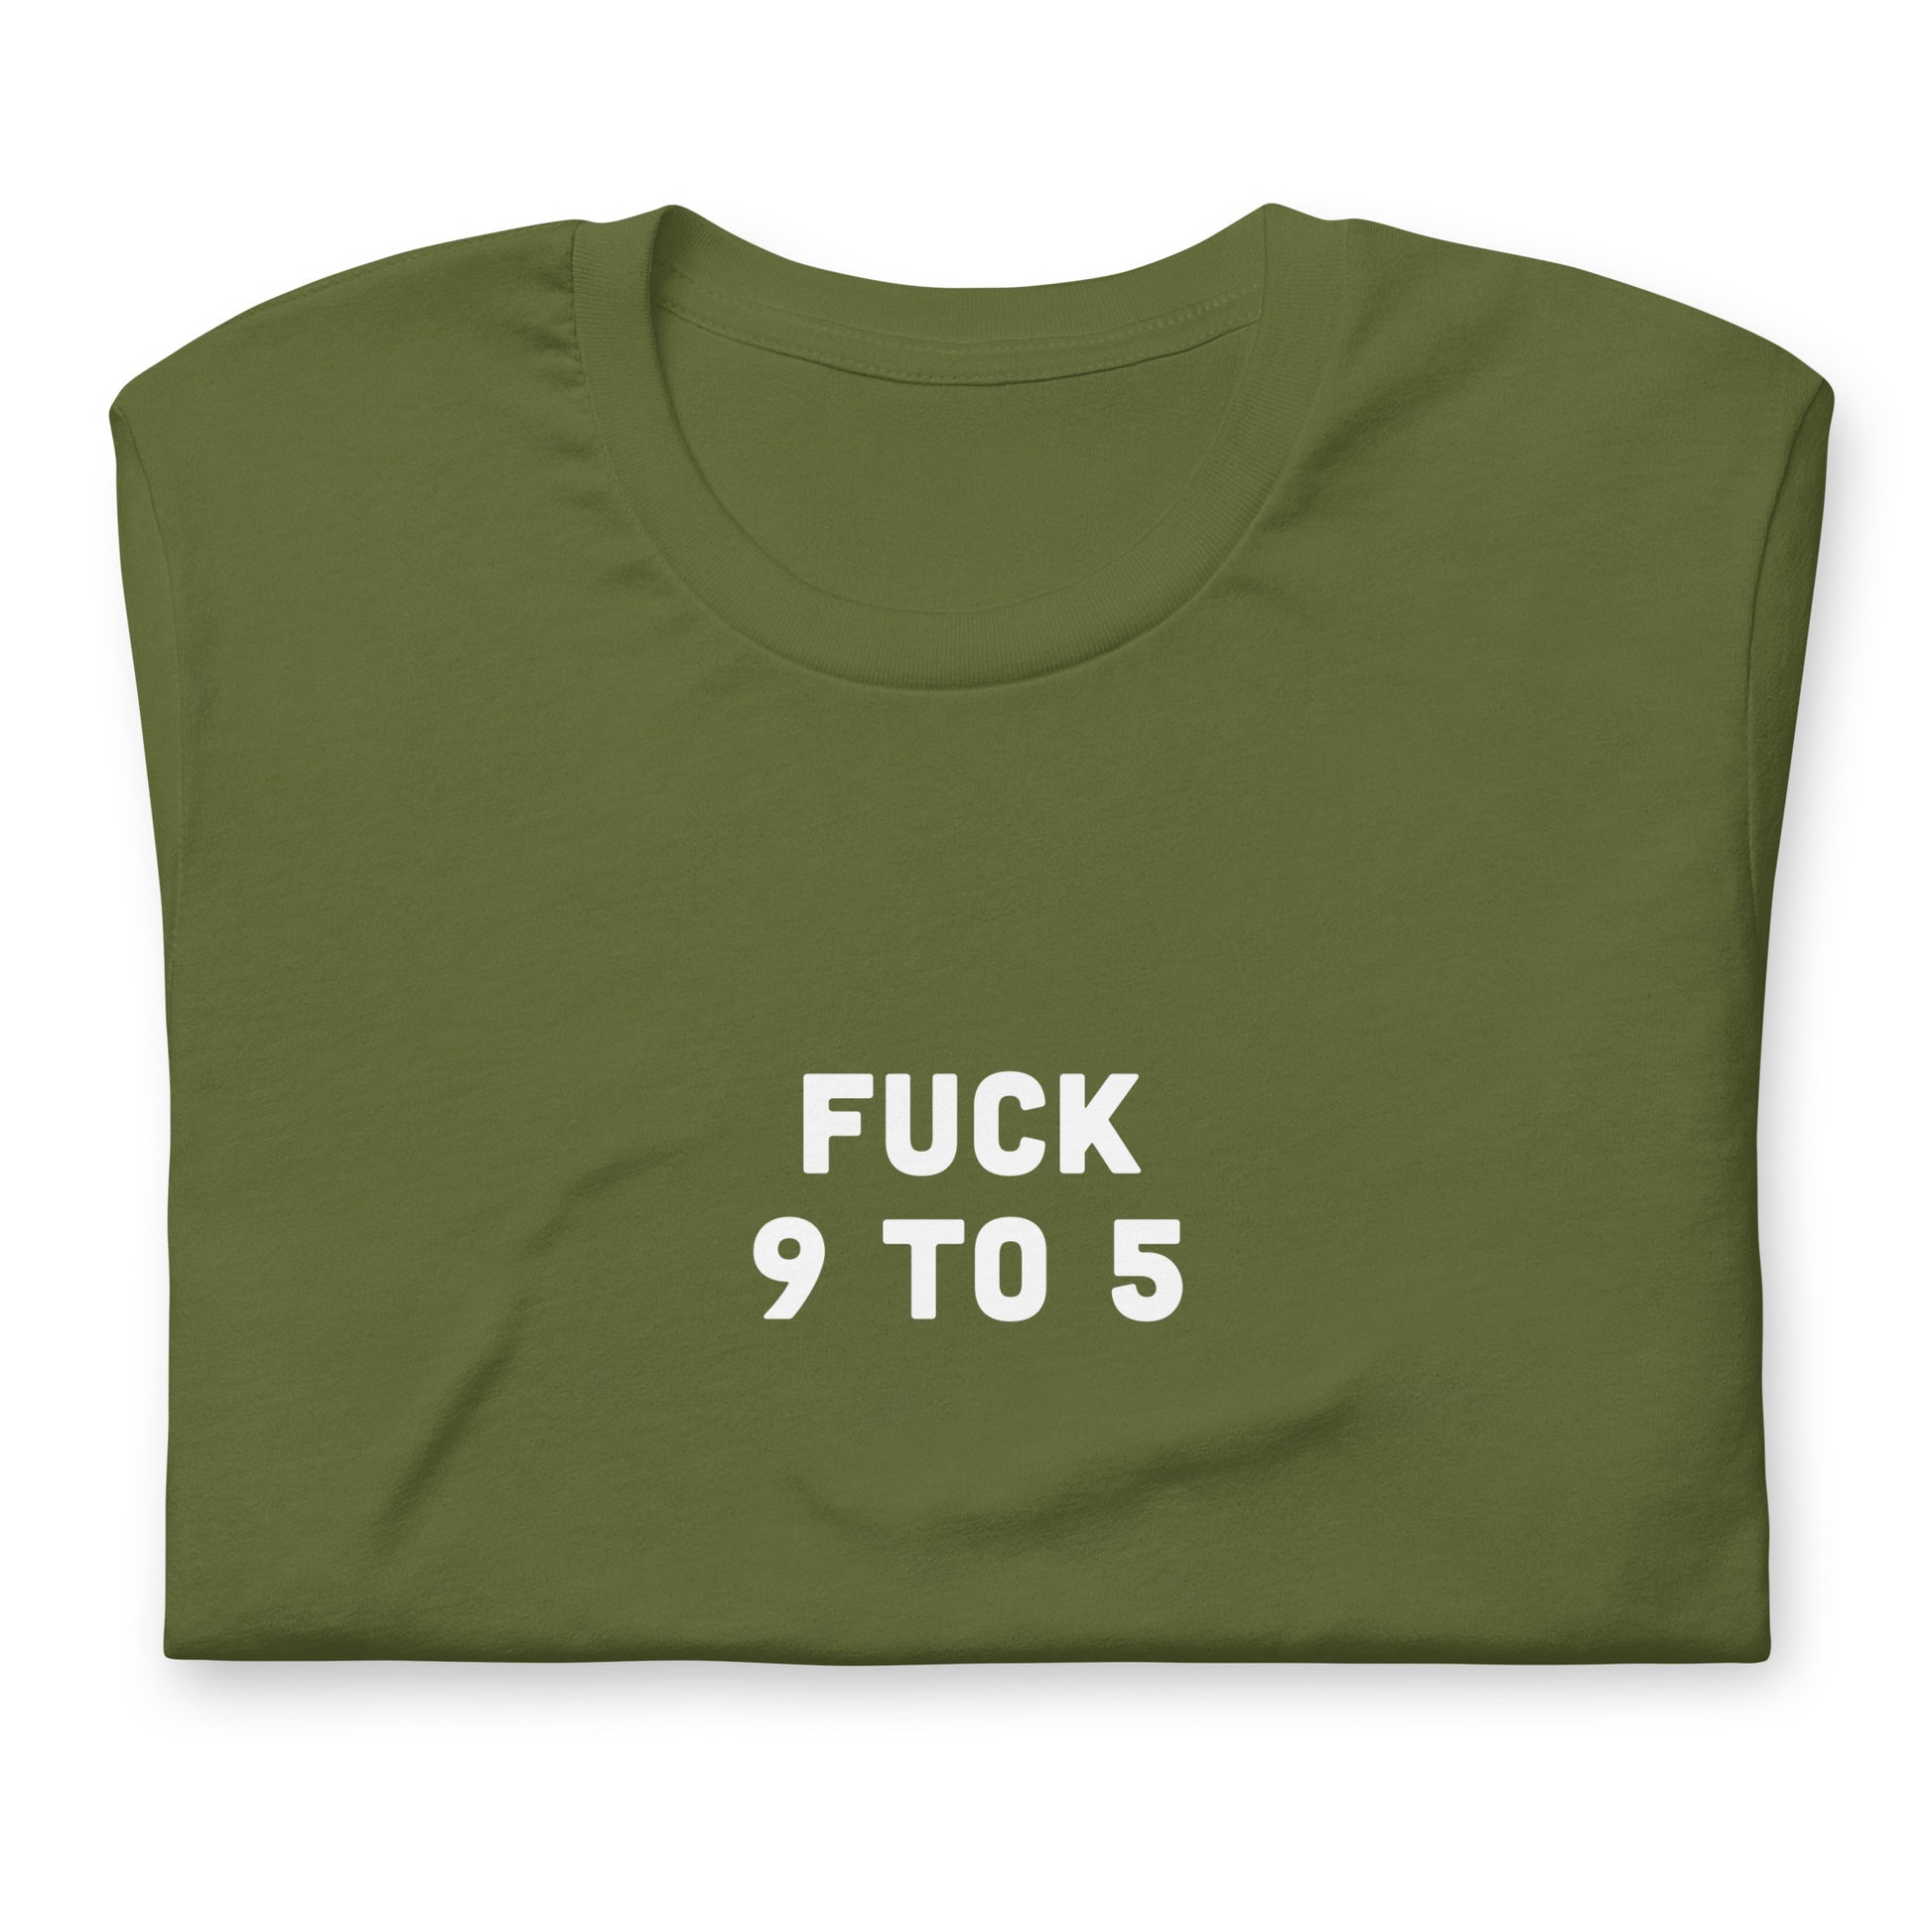 Fuck 9 To 5 T-Shirt Size 2XL Color Black